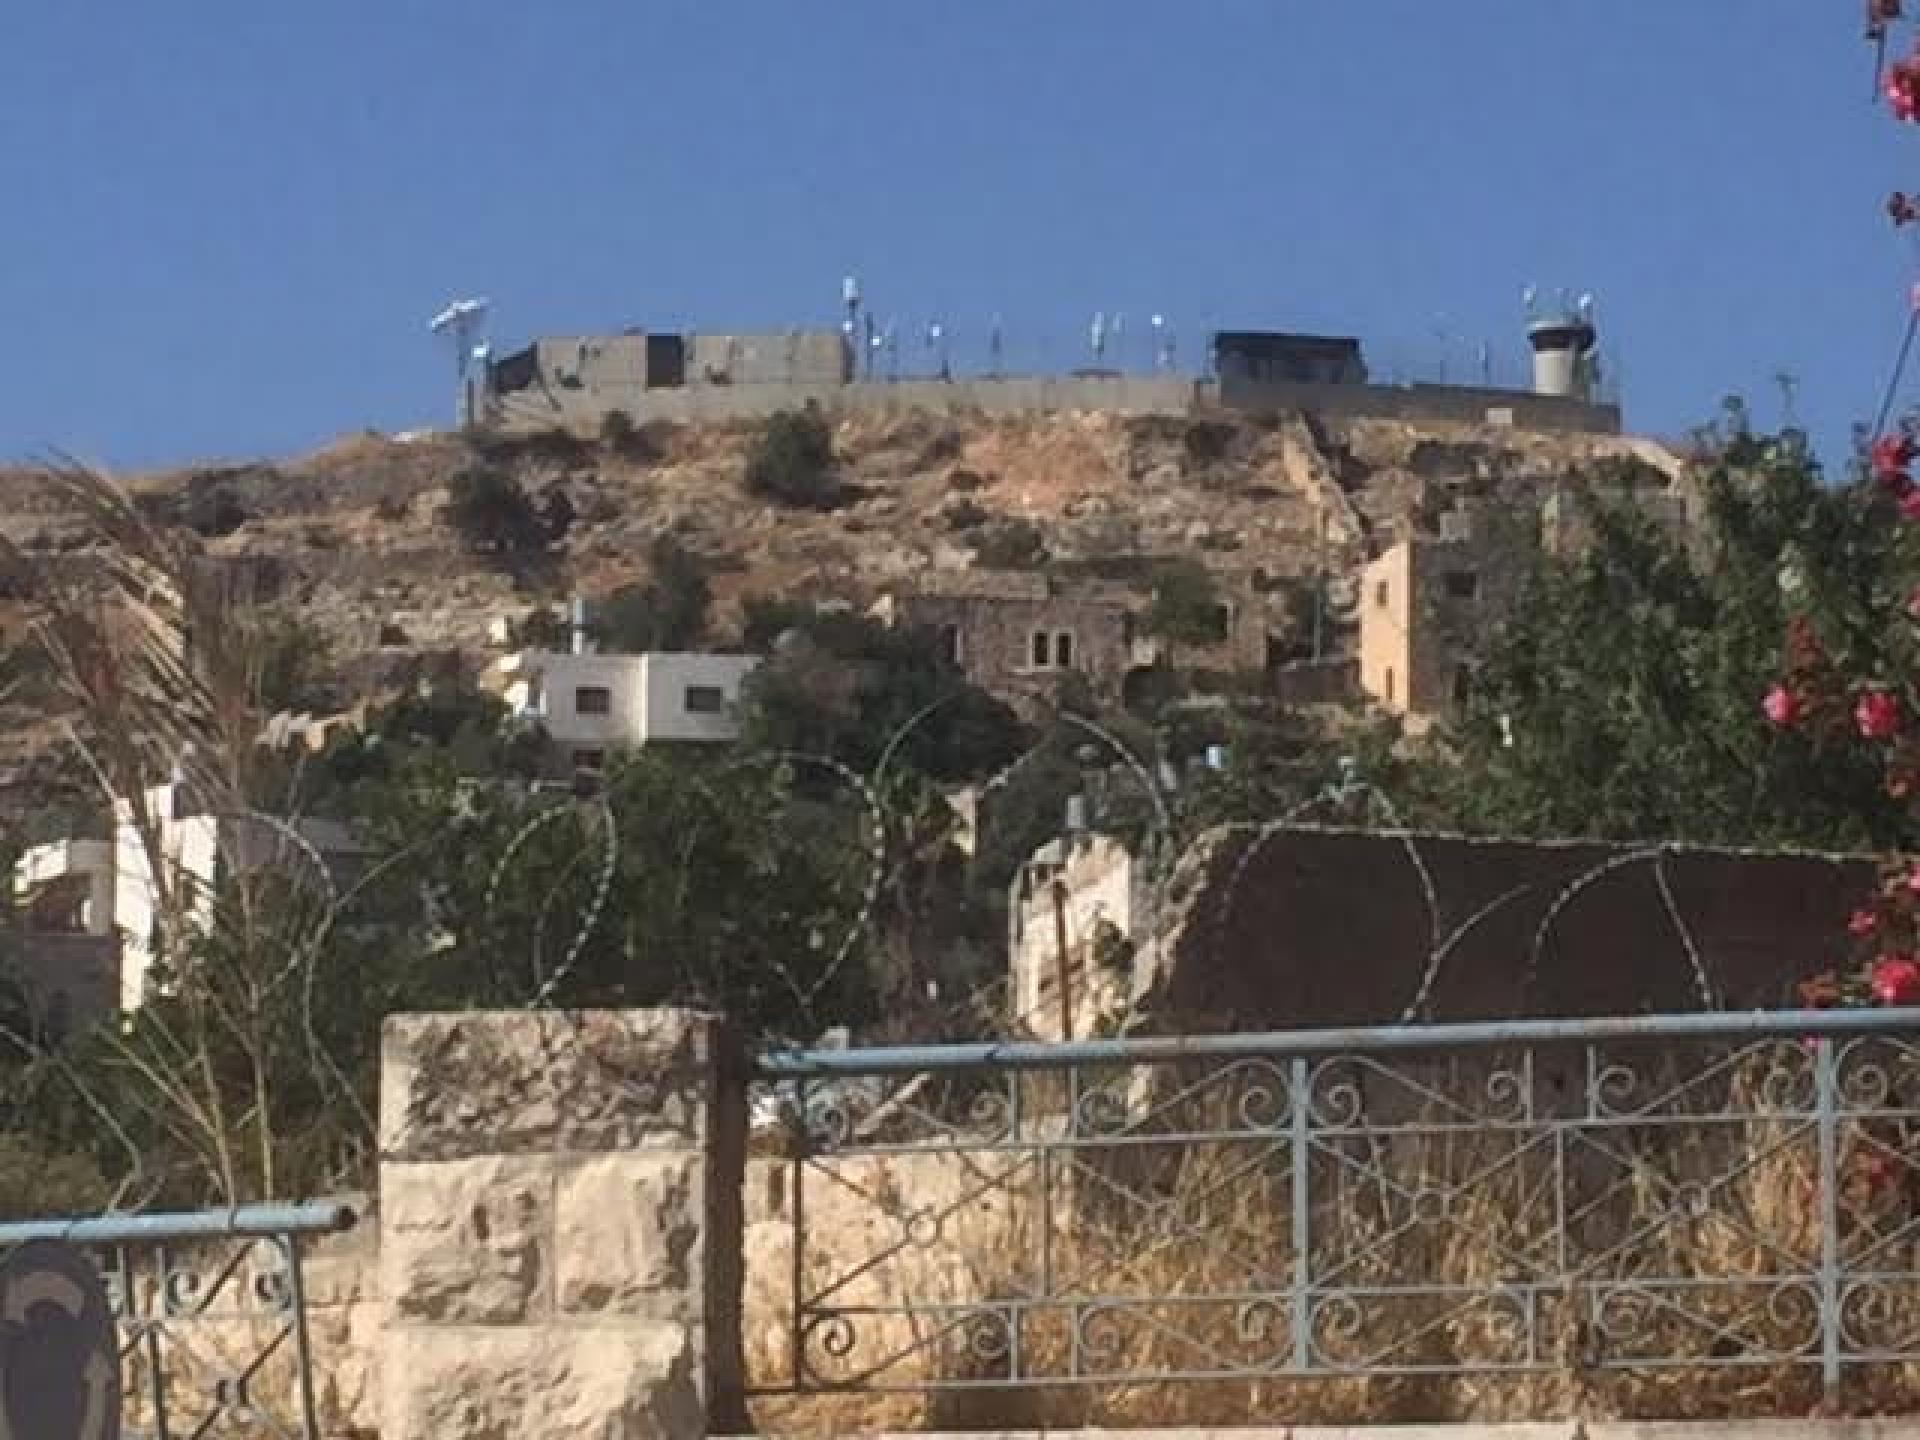 The pillbox and the camp on the hill of Abu Snan neighborhood